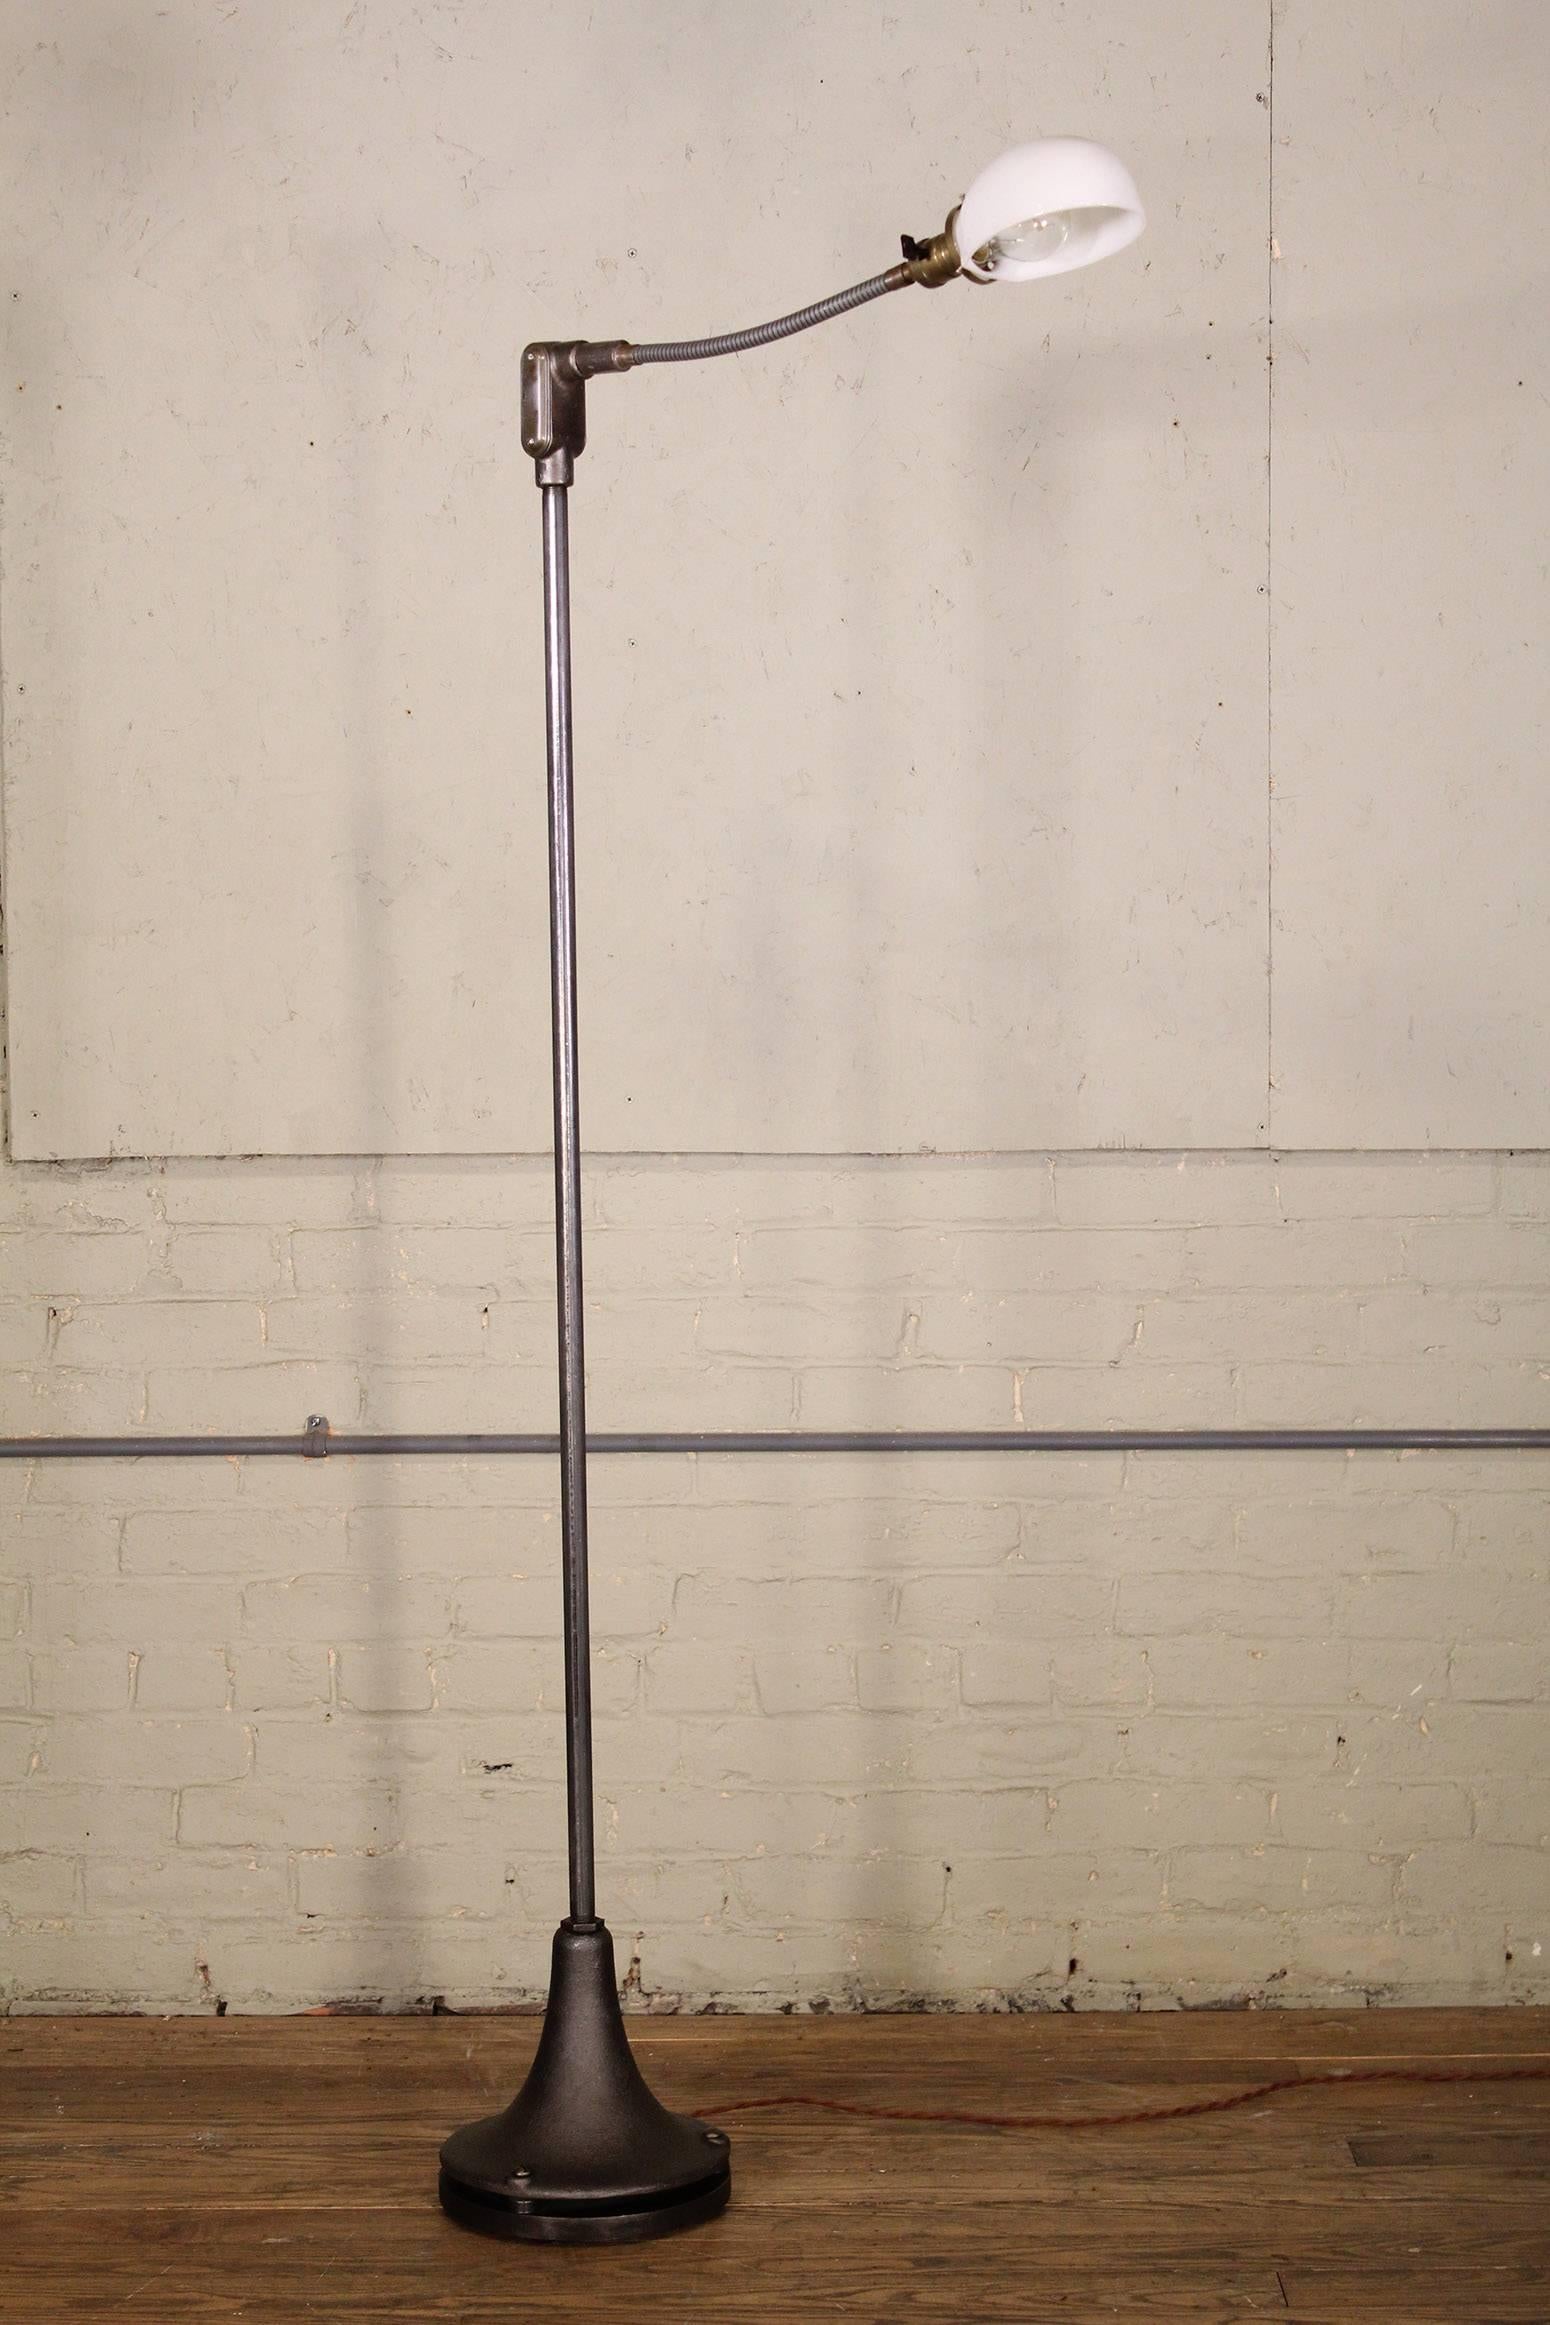 The original floor lamp featured in the rooms of The Gramercy Park Hotel. Cast-iron trumpet base, steel pole, goose-neck arm, brass socket and vintage milk glass shade. Metal shade also available. 
Mreasures
Base diameter 9 1/2